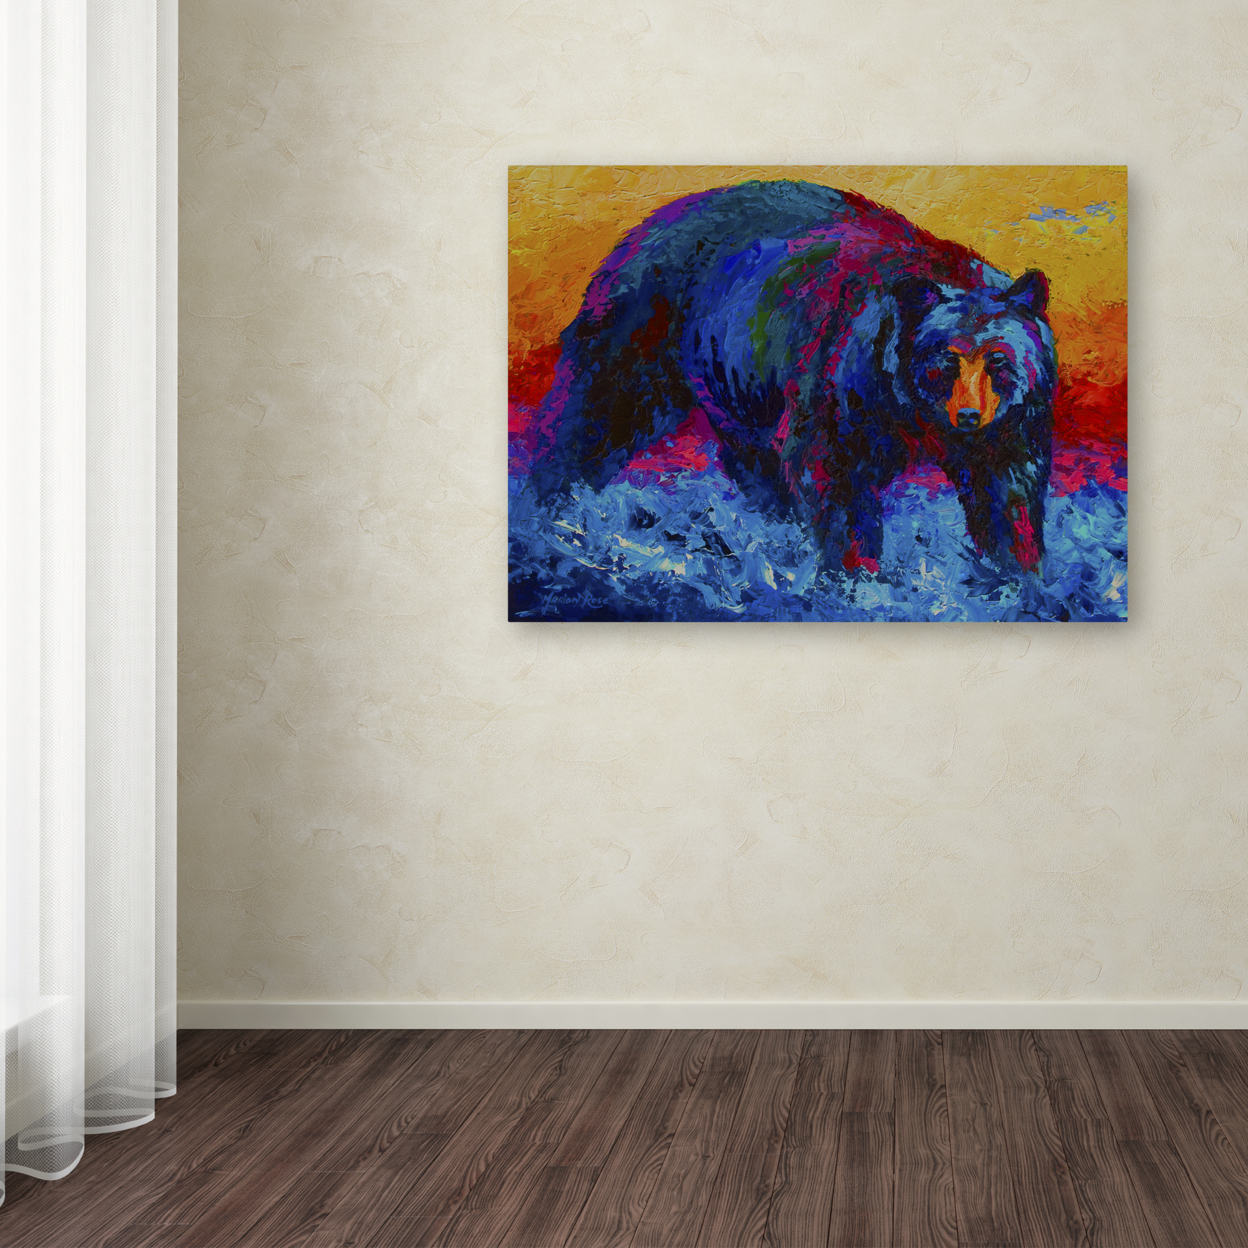 Marion Rose 'Scouting Fish Black Bear' Ready To Hang Canvas Art 35 X 47 Inches Made In USA